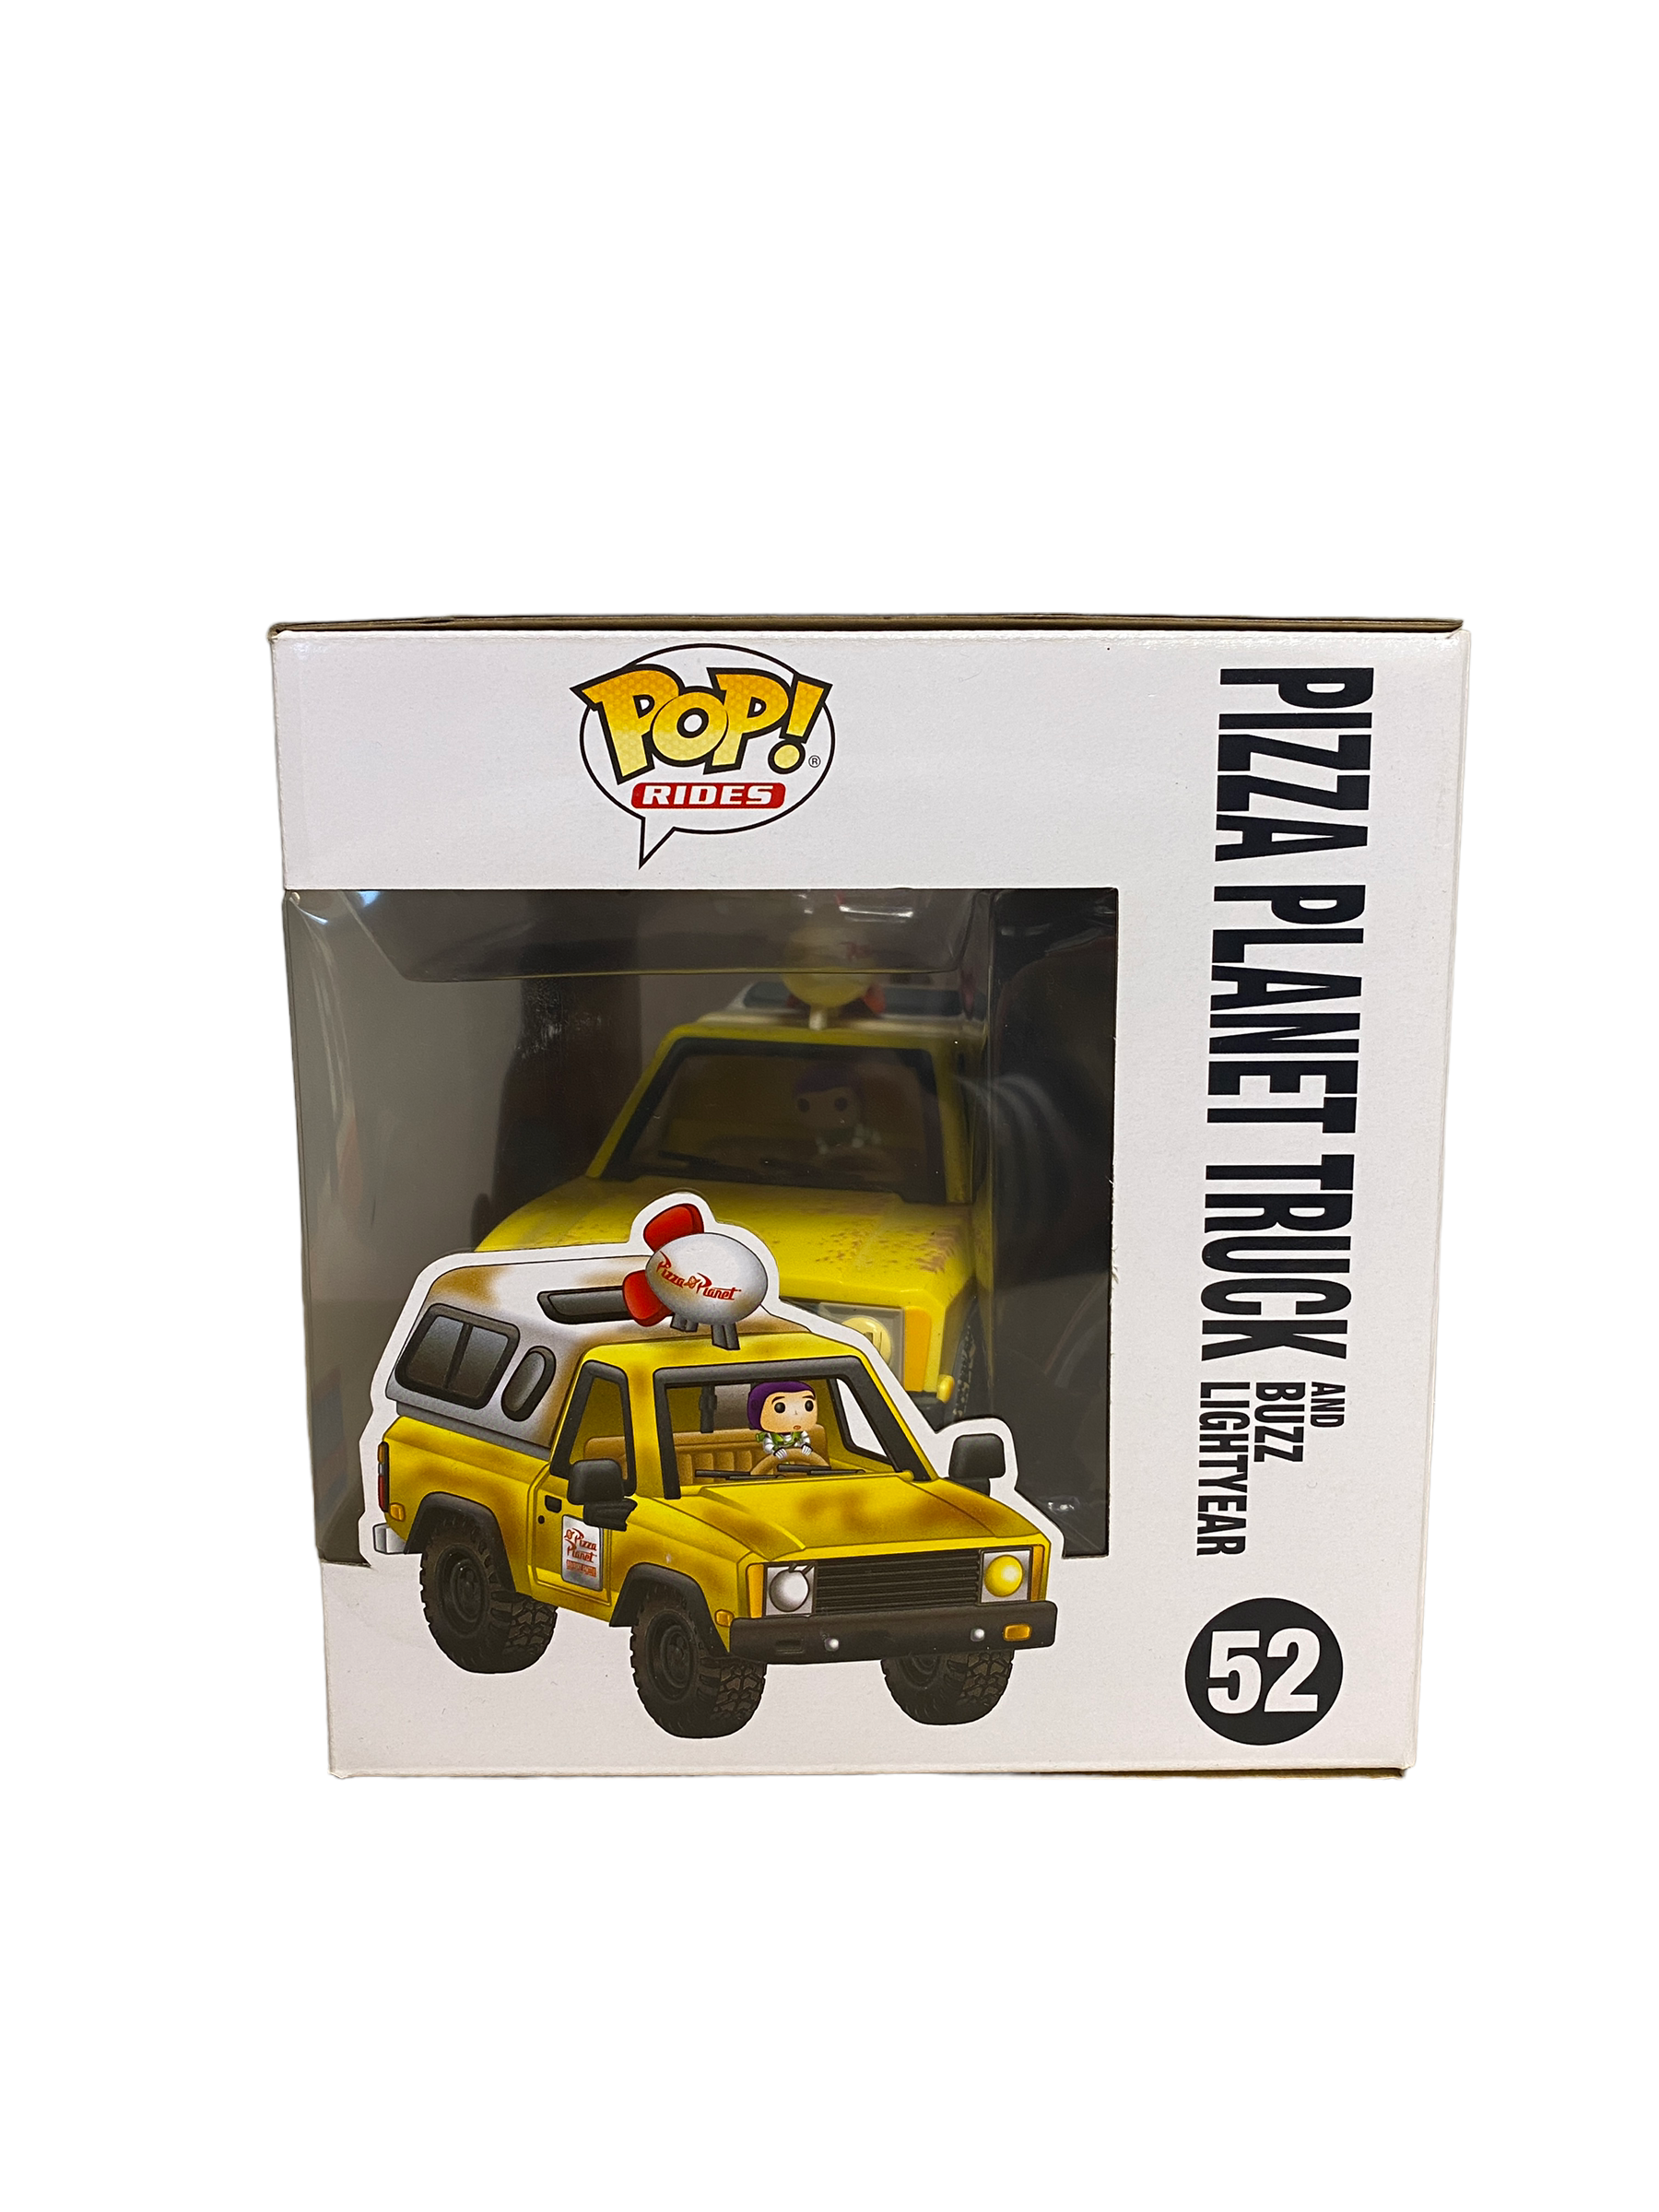 Pizza Planet Truck and Buzz Lightyear #52 Funko Pop Ride! - Toy Story - NYCC 2018 Shared Exclusive - Condition 8.5/10